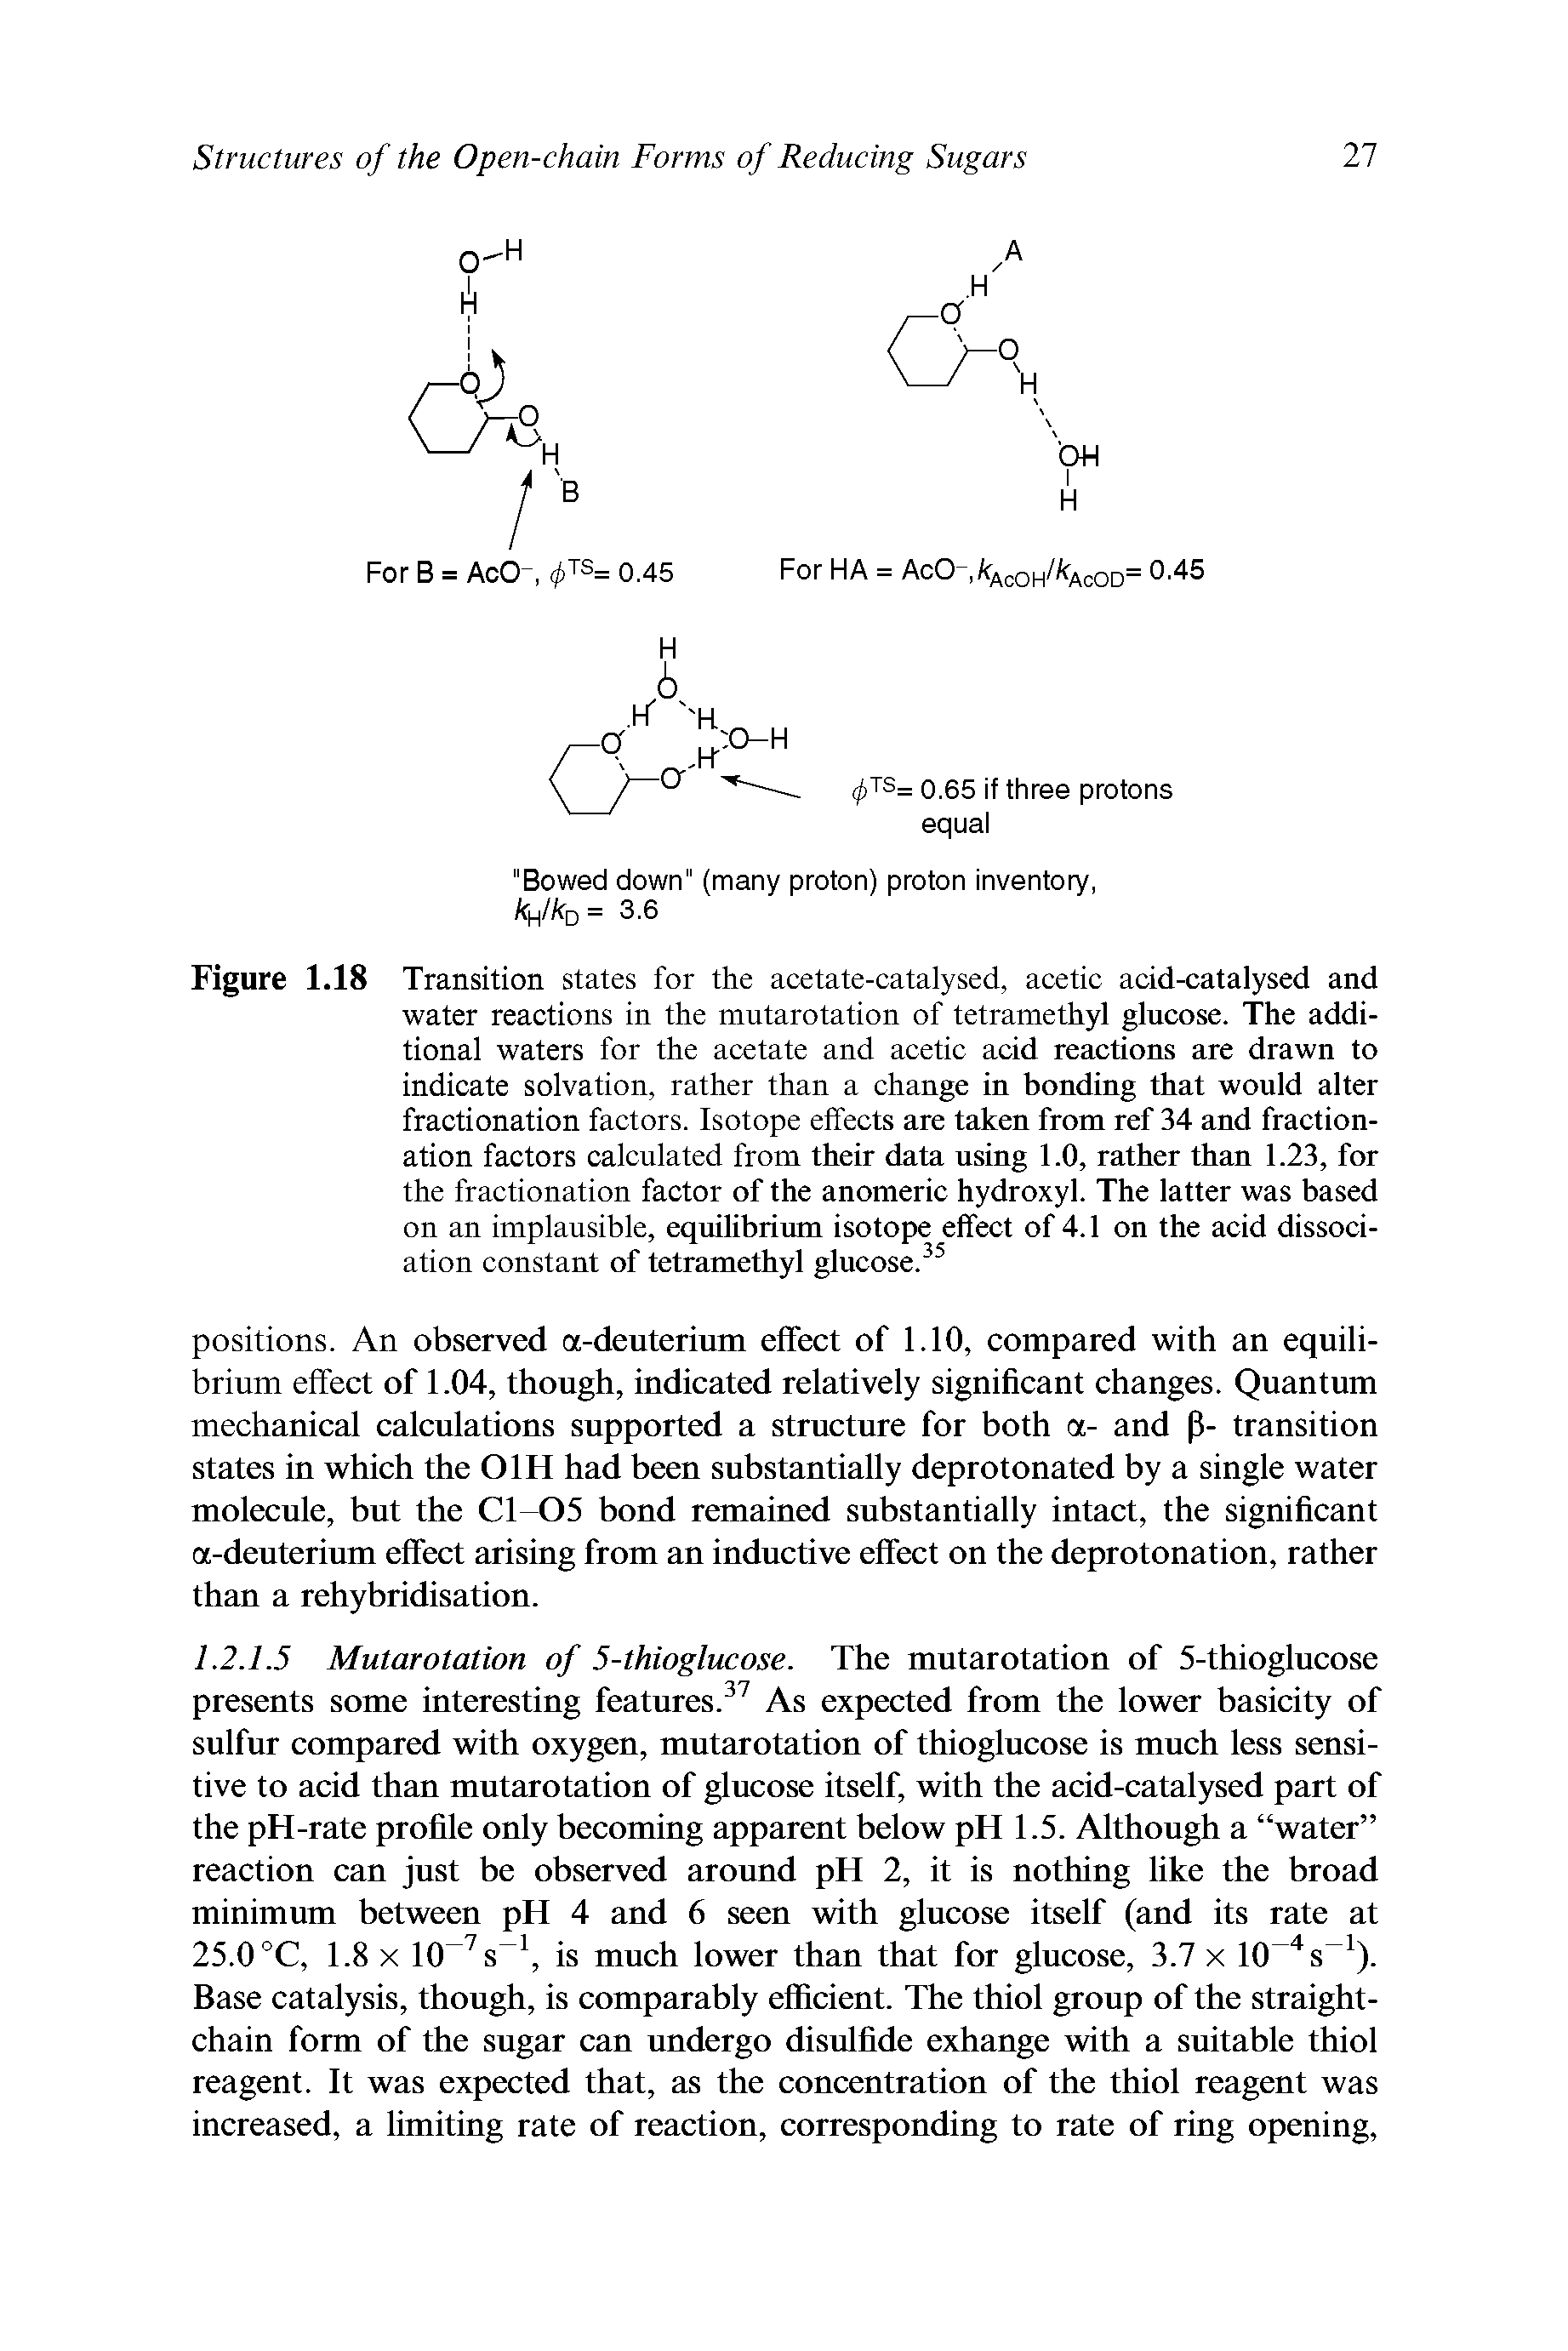 Figure 1.18 Transition states for the acetate-catalysed, acetic acid-catalysed and water reactions in the mutarotation of tetramethyl glucose. The additional waters for the acetate and acetic acid reactions are drawn to indicate solvation, rather than a change in bonding that would alter fractionation factors. Isotope effects are taken from ref 34 and fractionation factors calculated from their data using 1.0, rather than 1.23, for the fractionation factor of the anomeric hydroxyl. The latter was based on an implausible, equilibrium isotope effect of 4.1 on the acid dissociation constant of tetramethyl glucose. ...